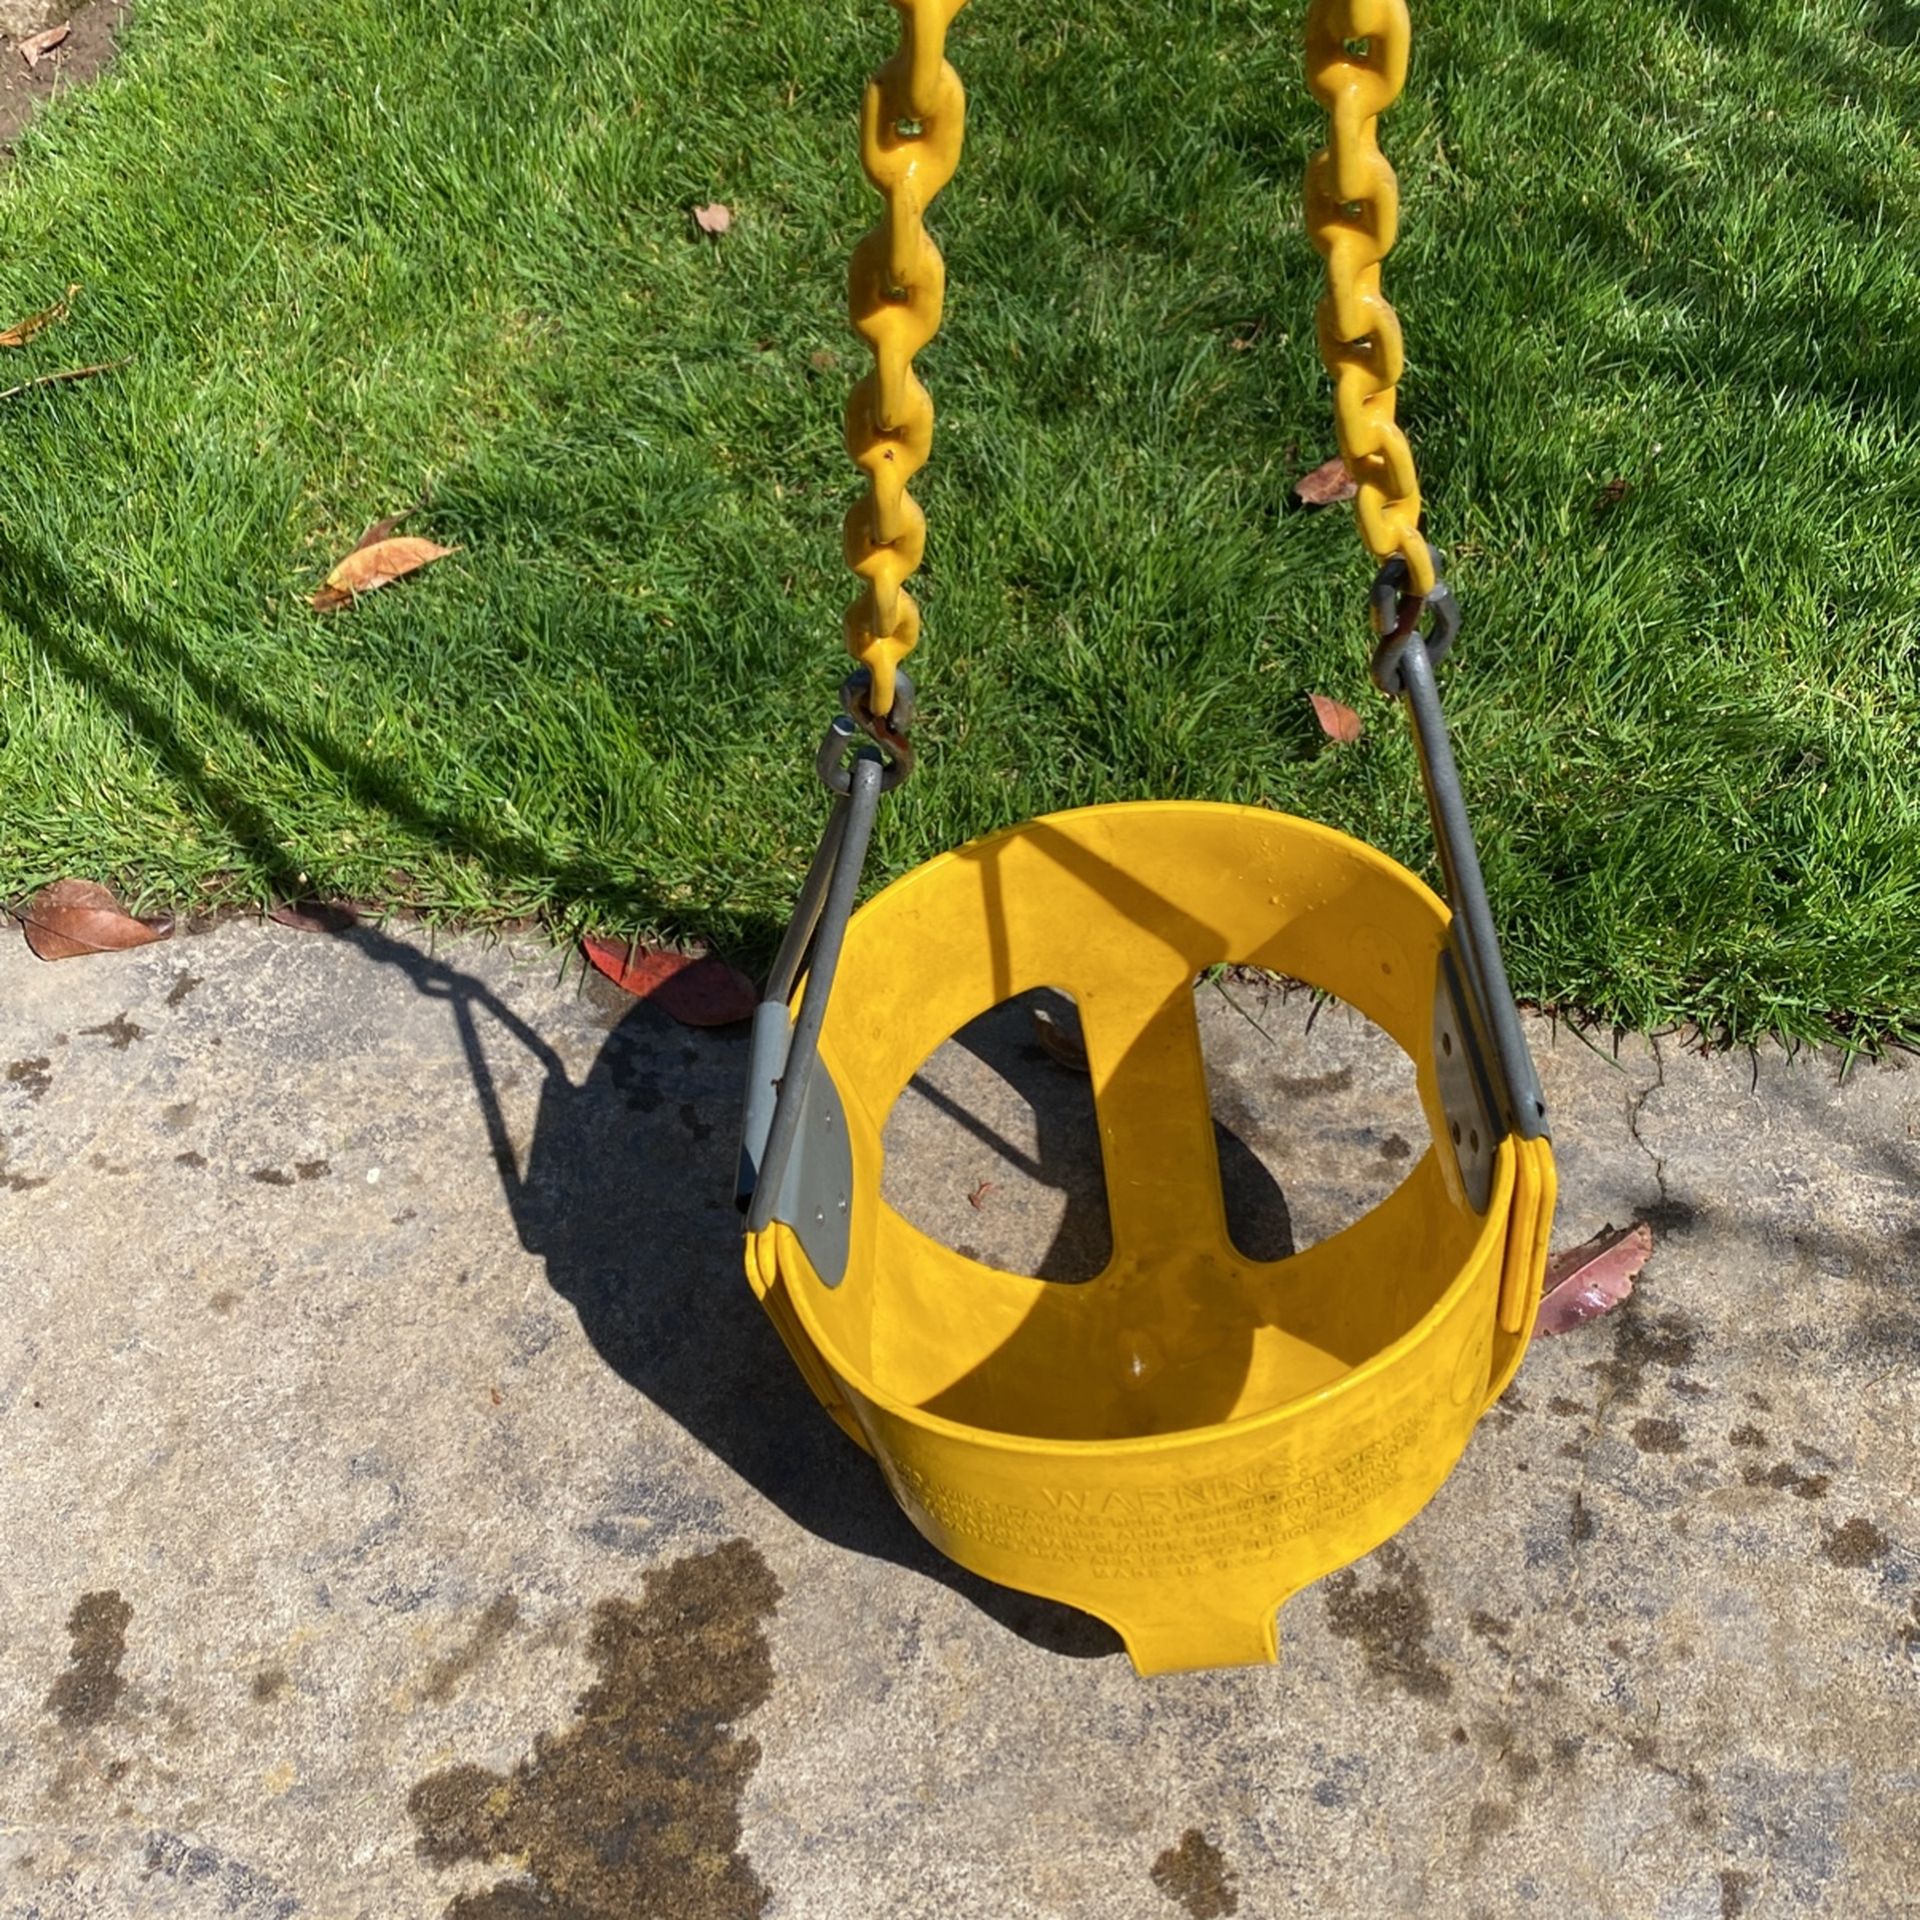 Infant (Small Childs) Swing For Swing Set